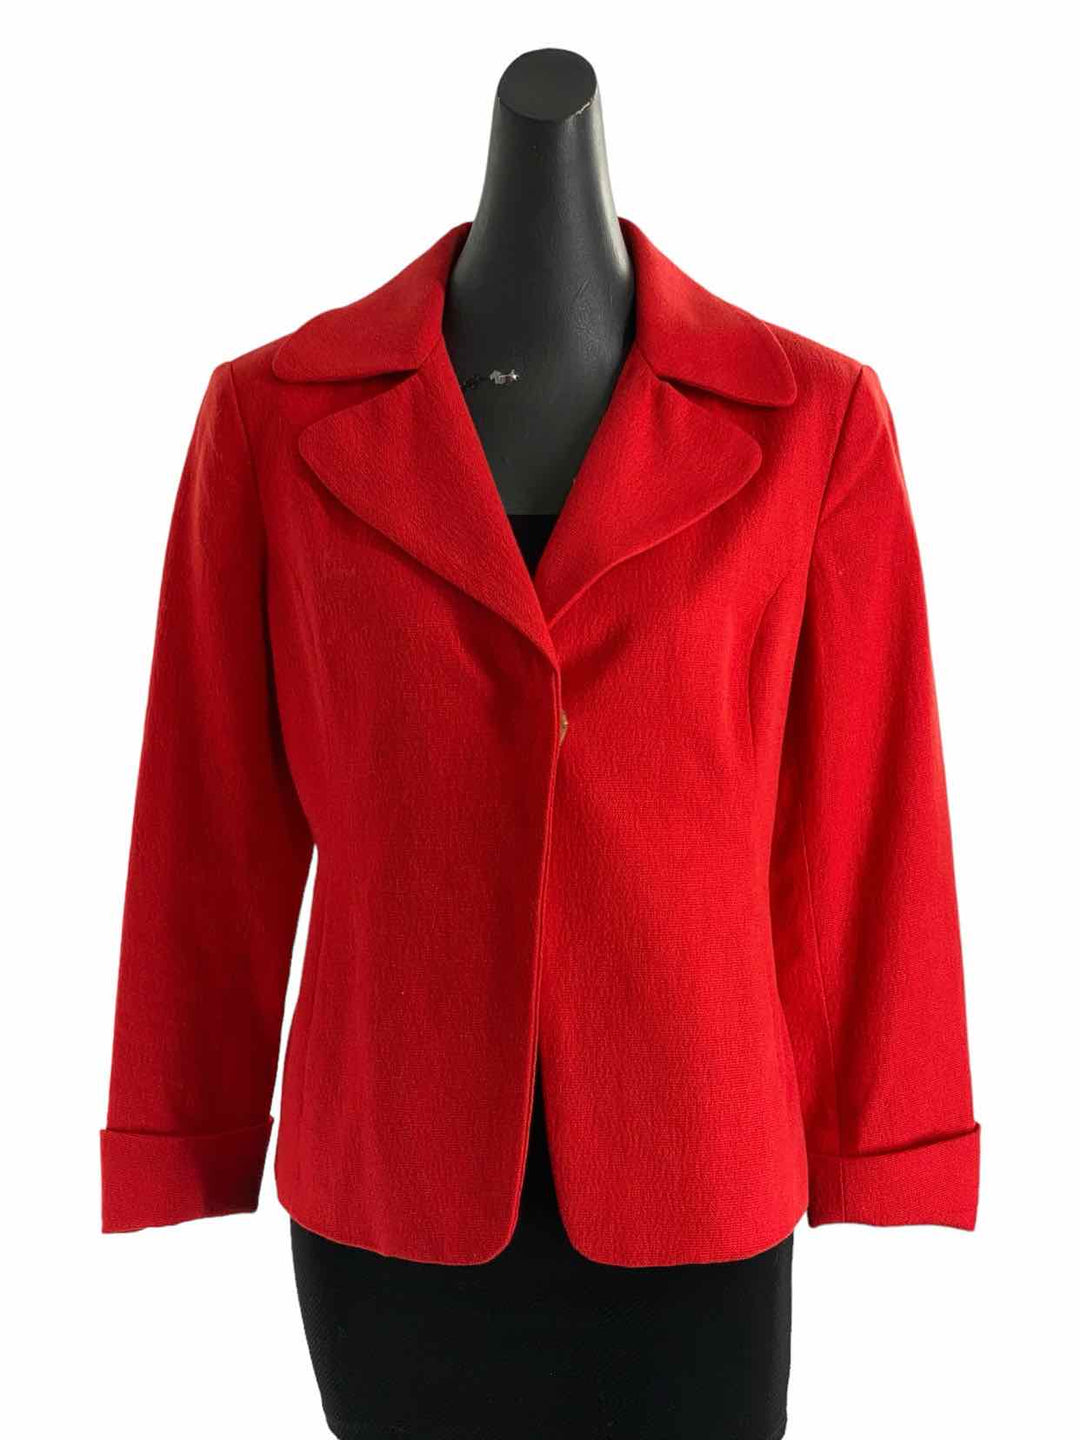 Coldwater Creek Size 8 Red Jacket